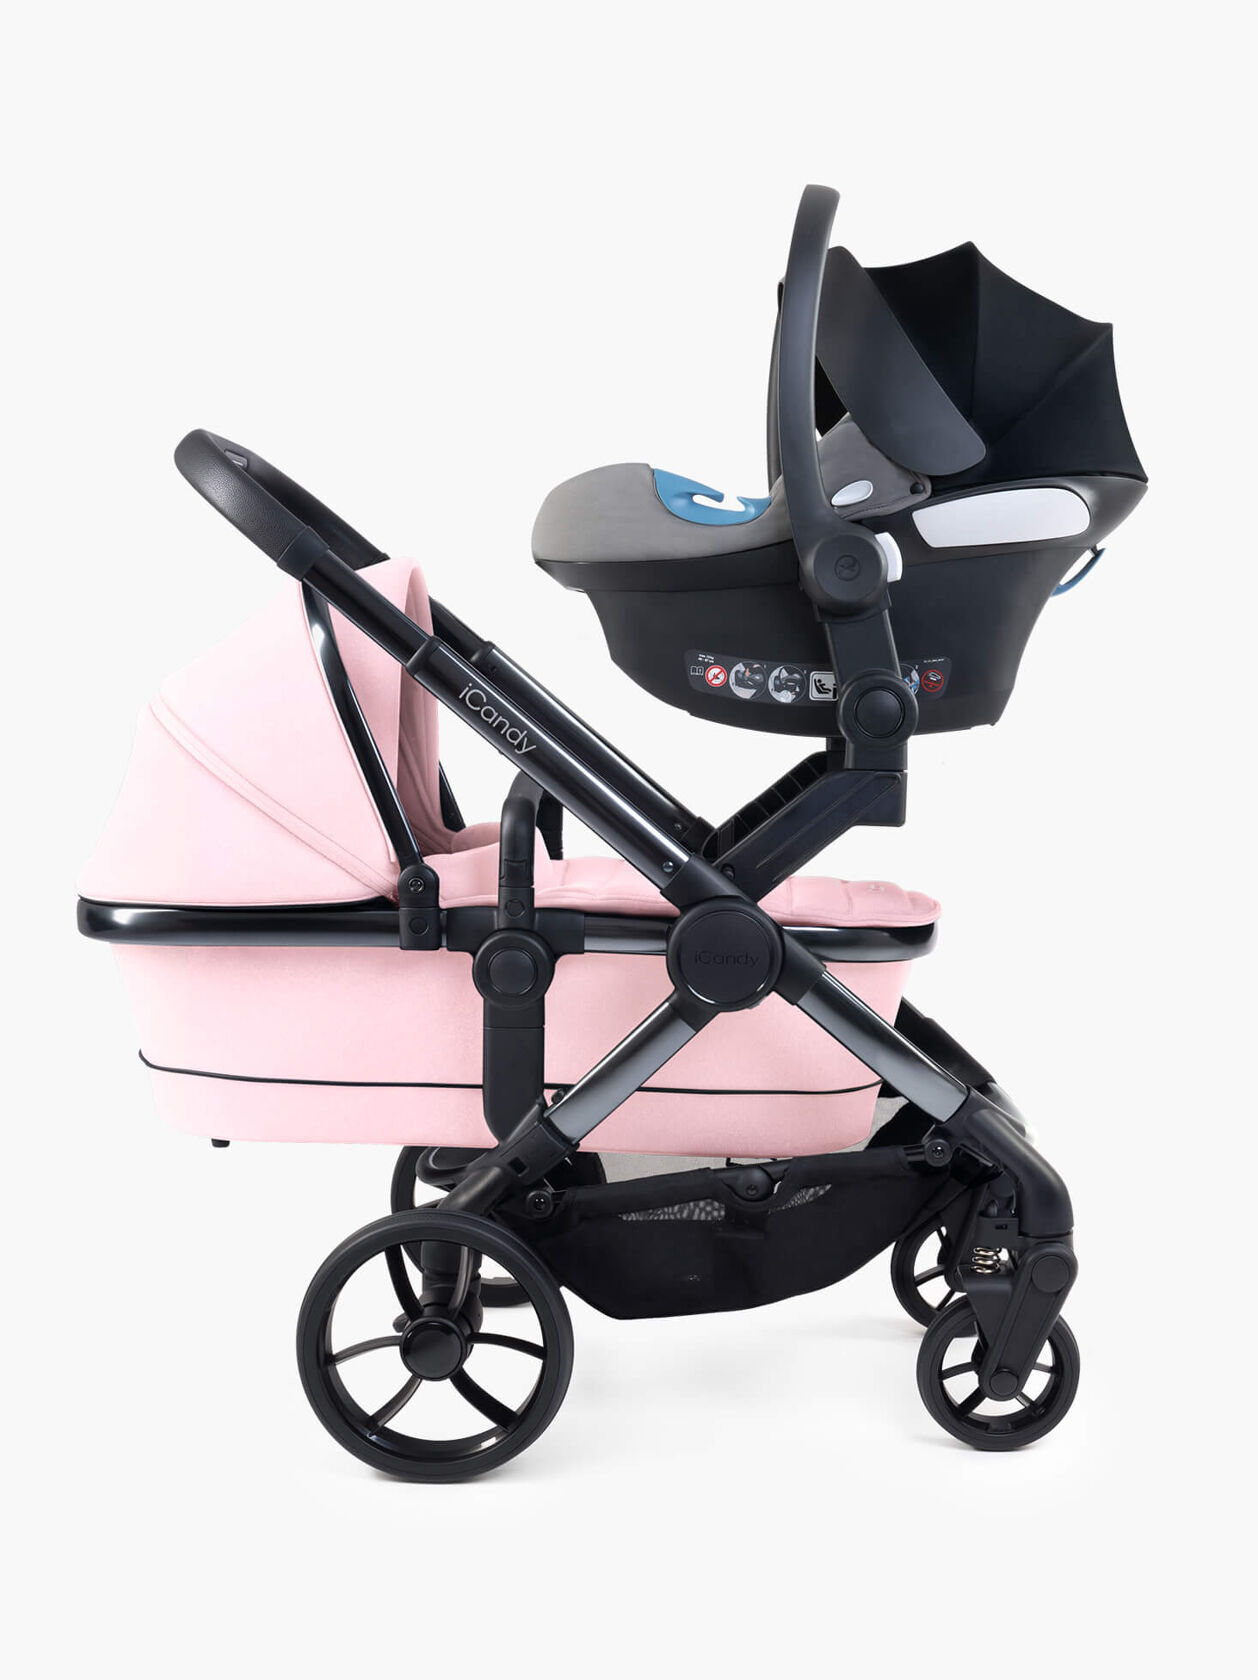 Peach 7 Pushchair and Carrycot - Twin